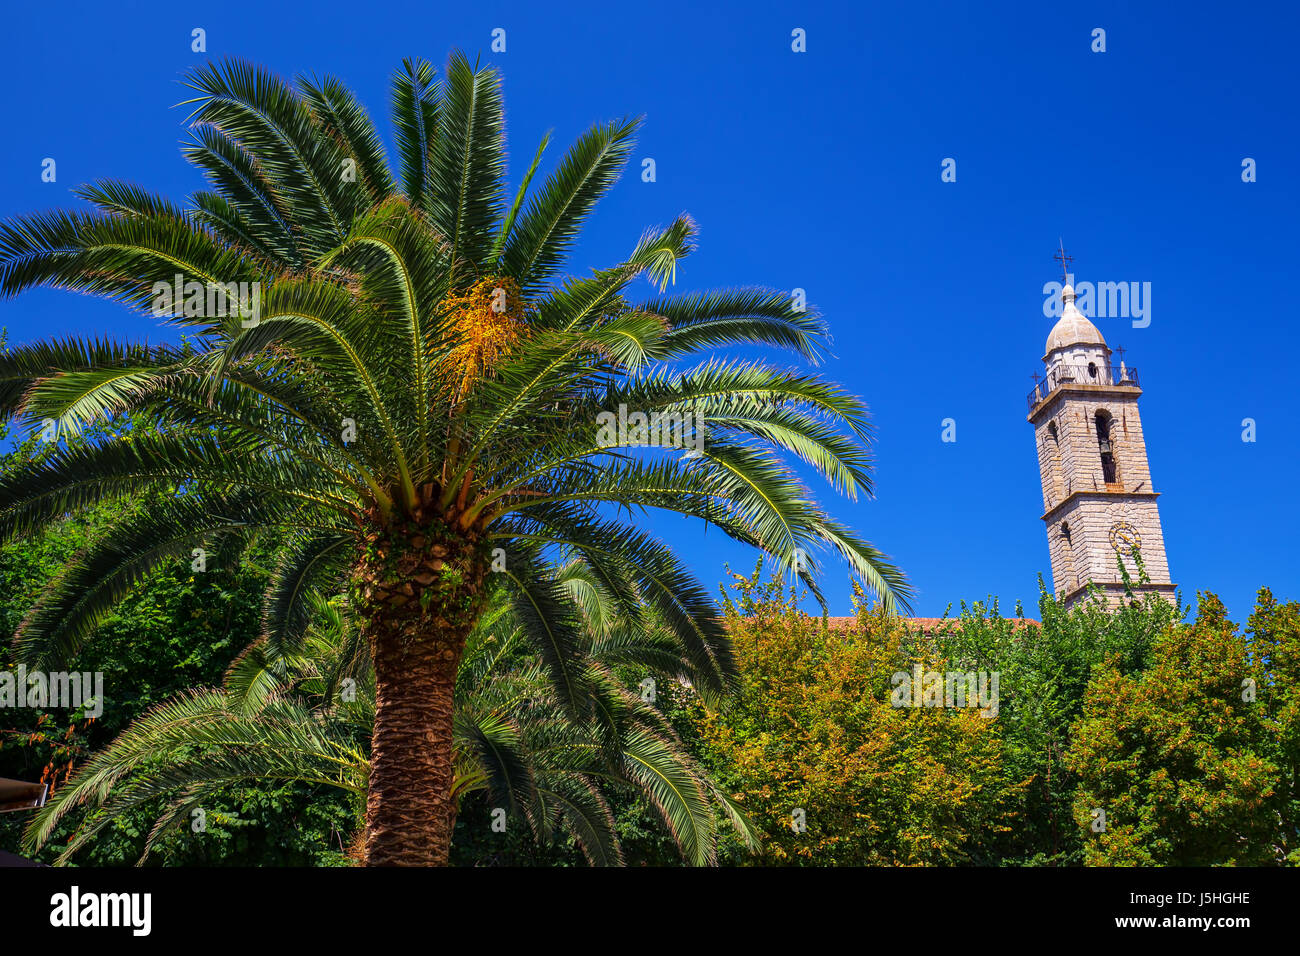 Old city center of Sartene town, Corsica, France, Europe. Stock Photo